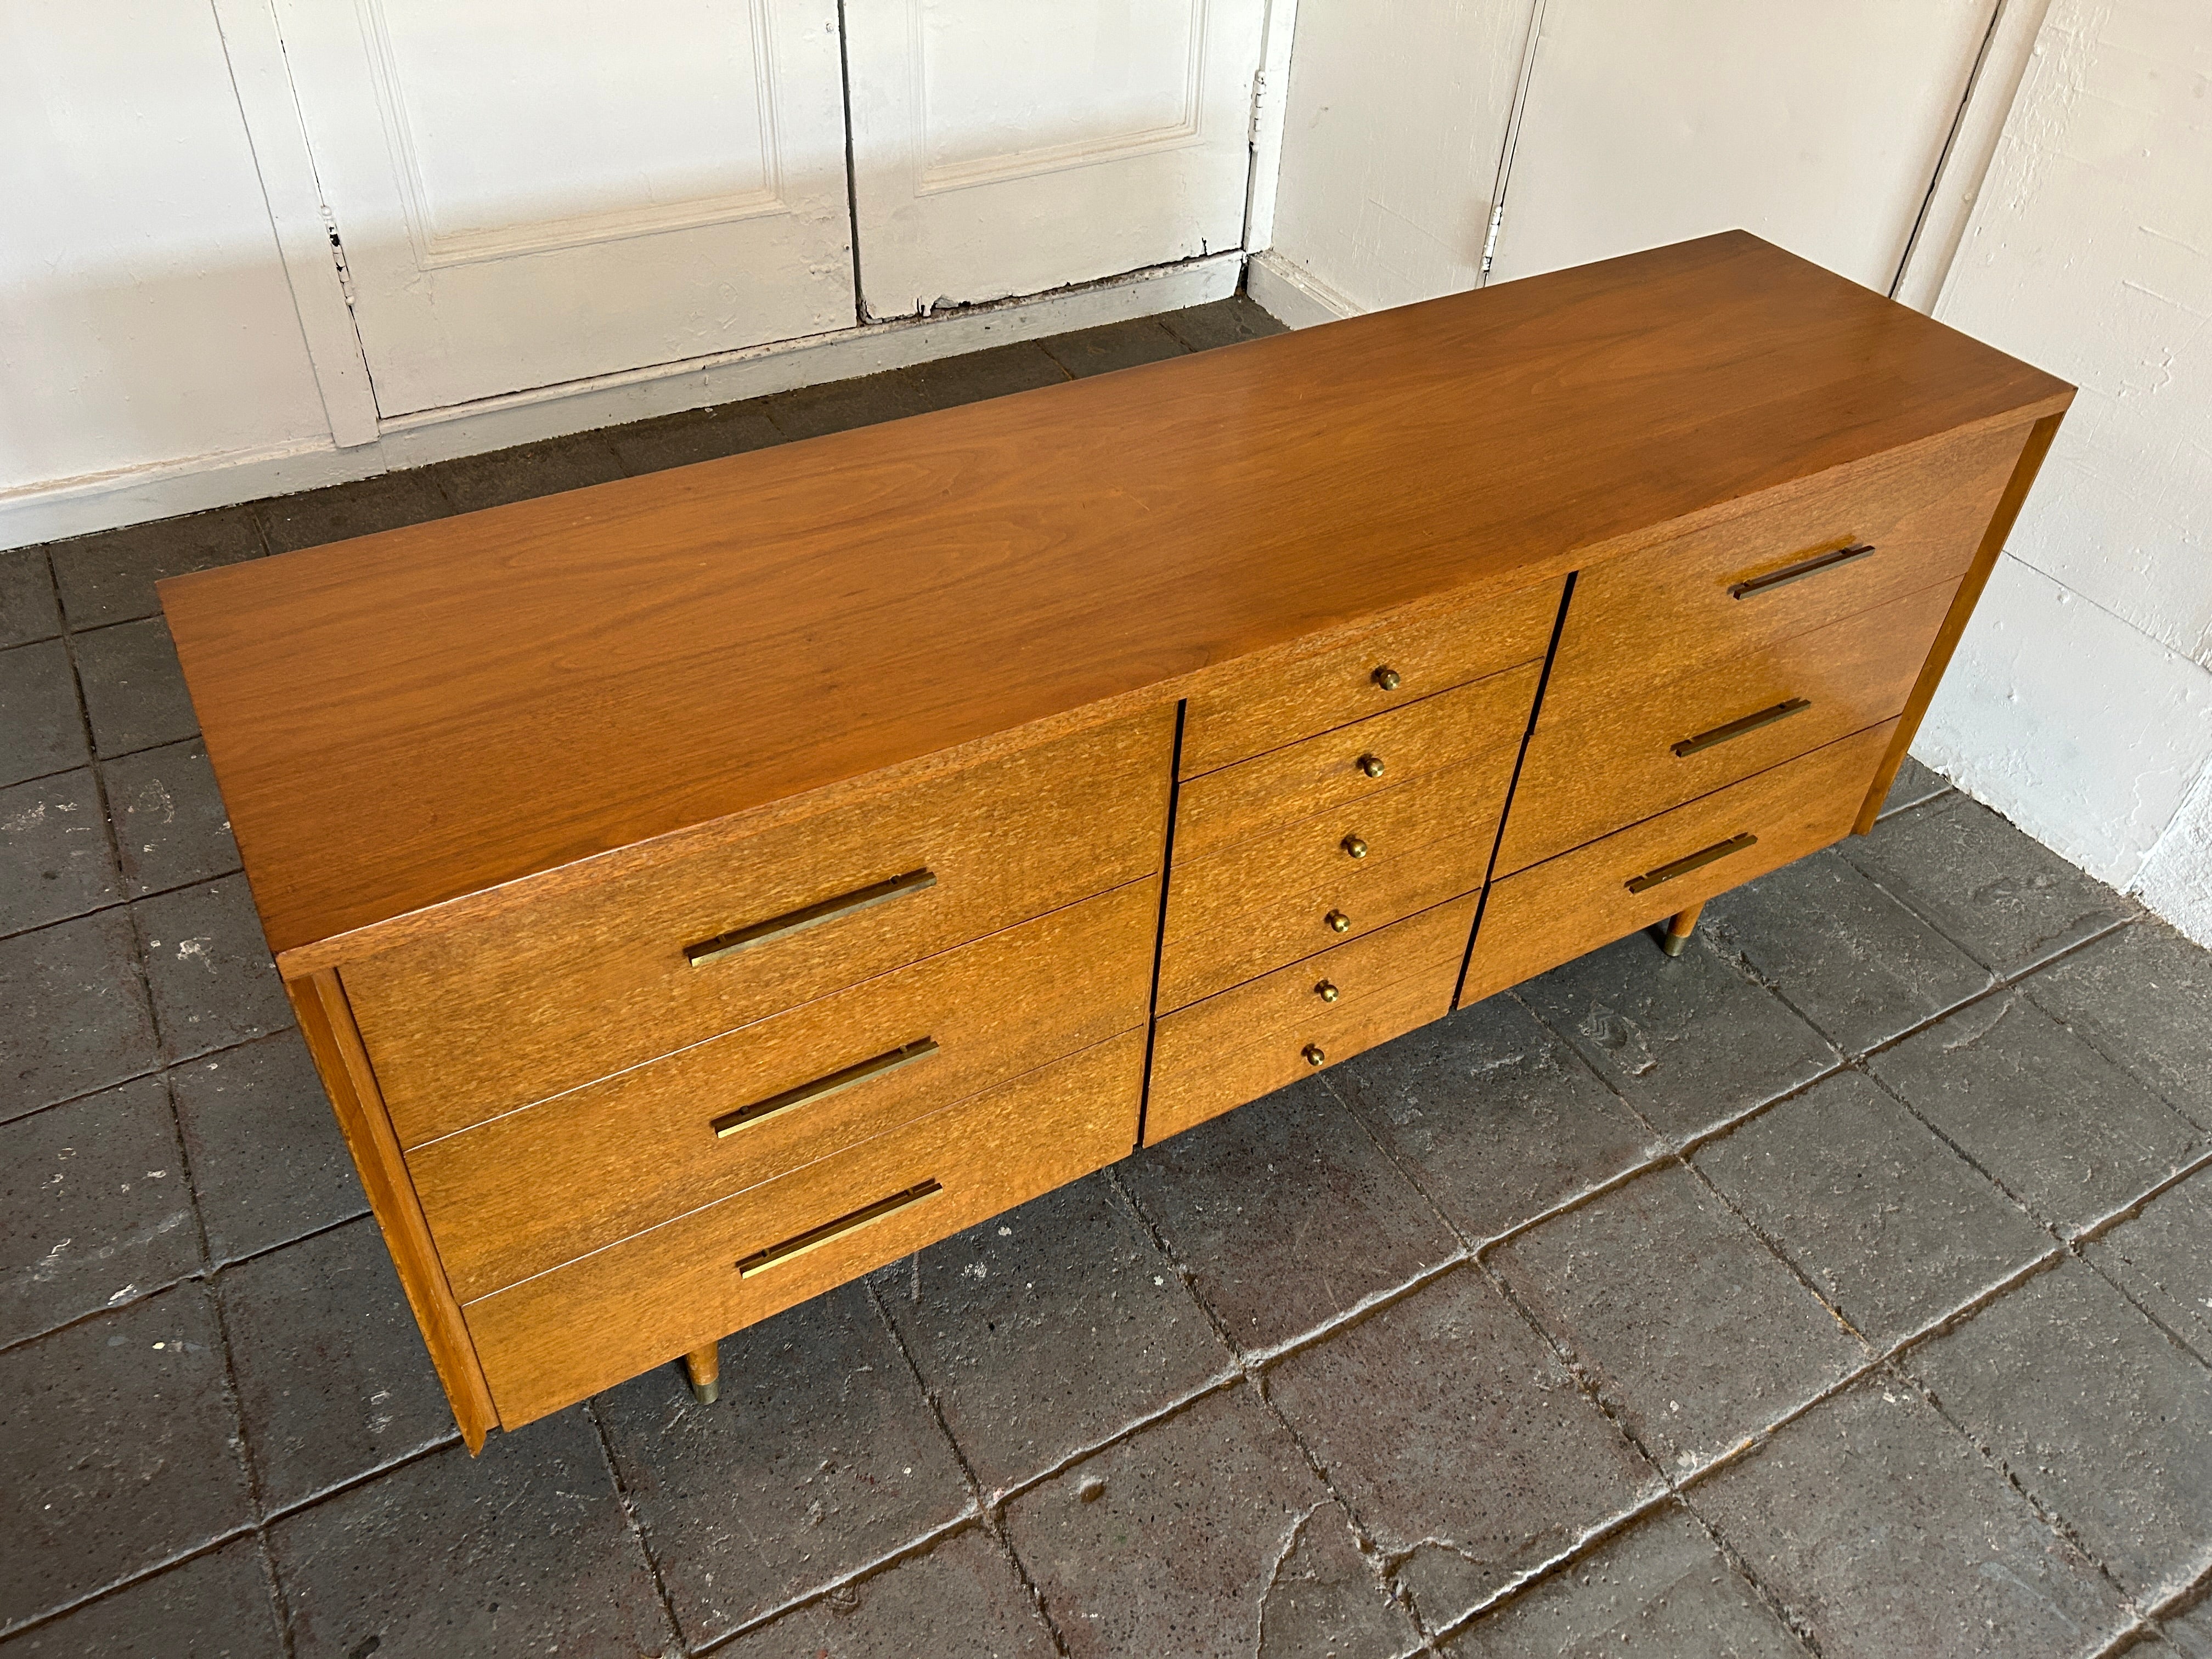 Stunning Mid-Century Modern John Stuart Widdicomb walnut 10 drawer dresser credenza Brass Knobs and Pull Handles. Walnut wood with speckled finish. Very clean Dresser inside and out all drawers are clean and slide smooth. Very high quality